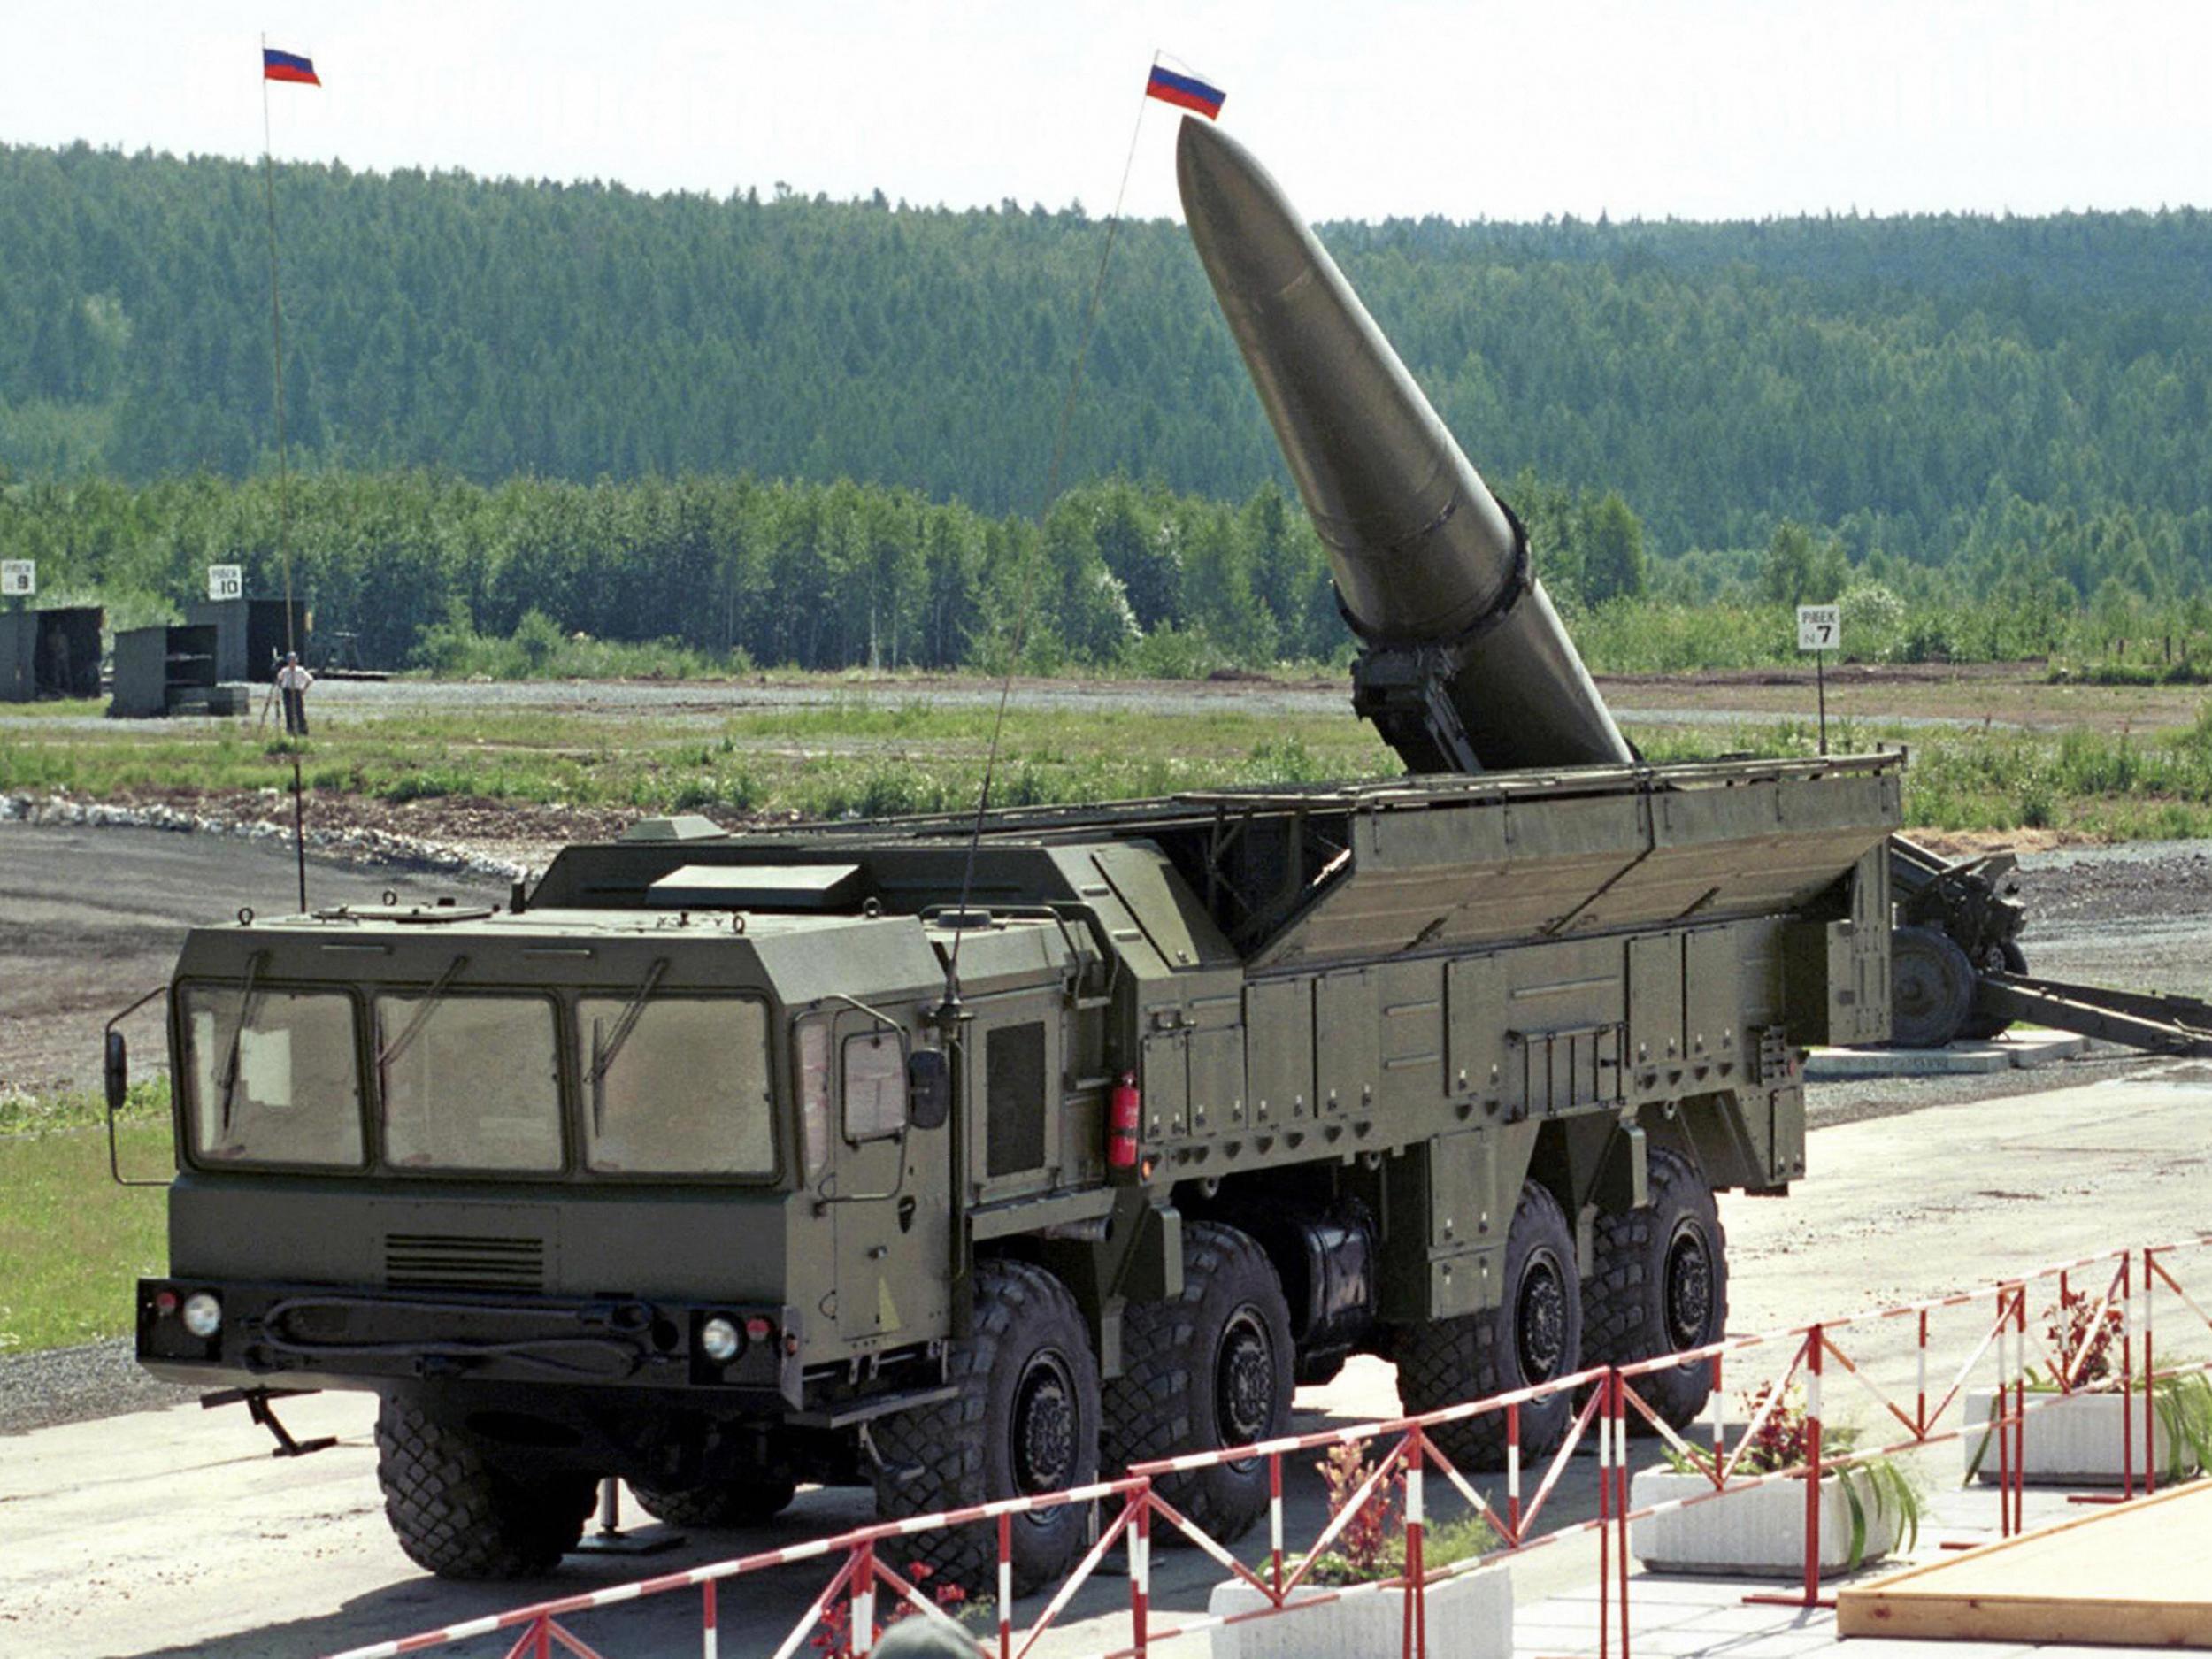 Russian missile complex 'Iskander' on display during a military equipment exhibition in the Siberian town of Nizhny Tagil in 2009